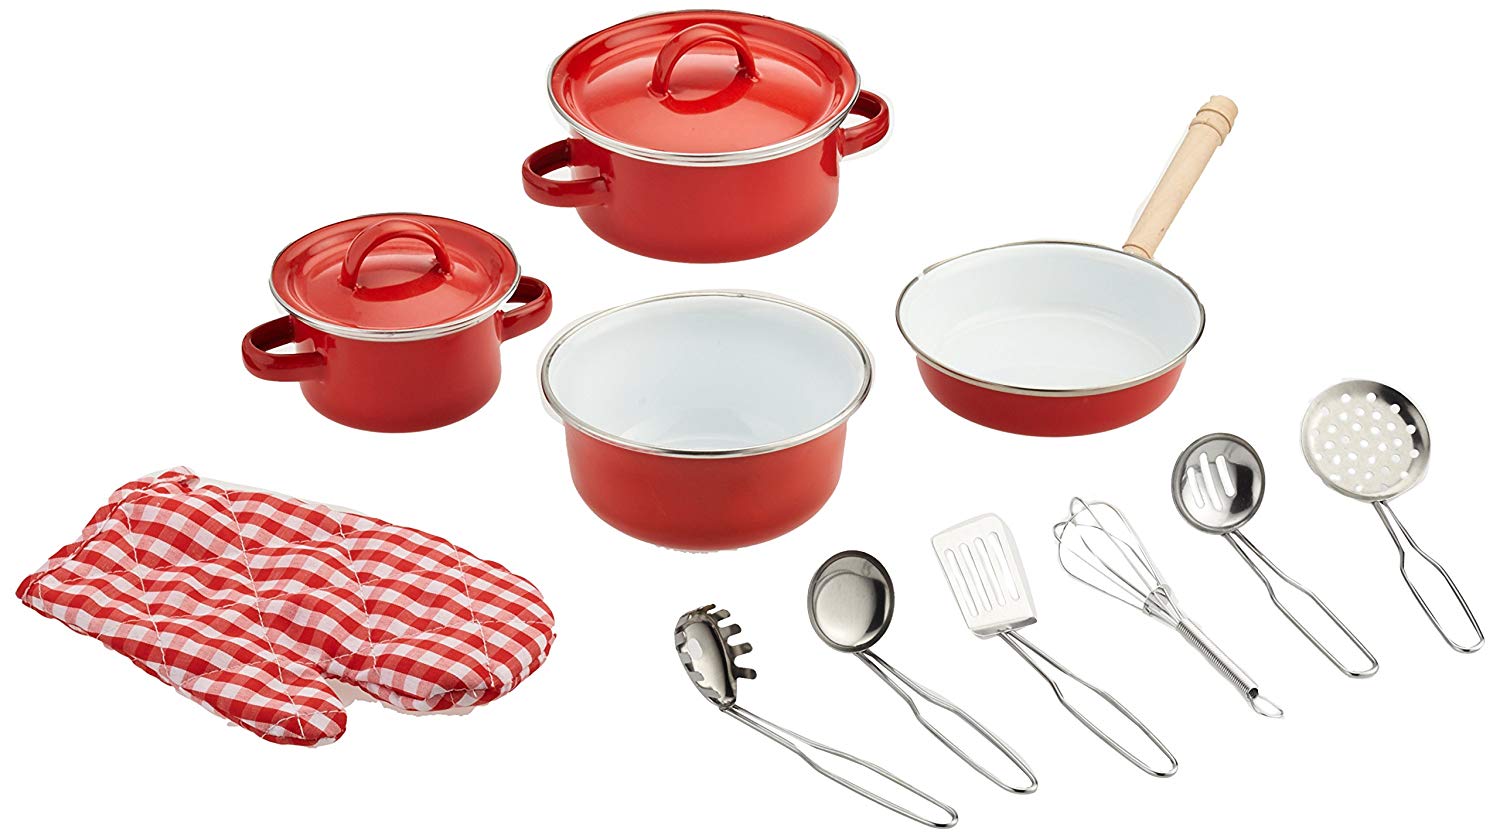 Small Foot by Legler Legler "Red" Cookware Kitchen And Food Toy